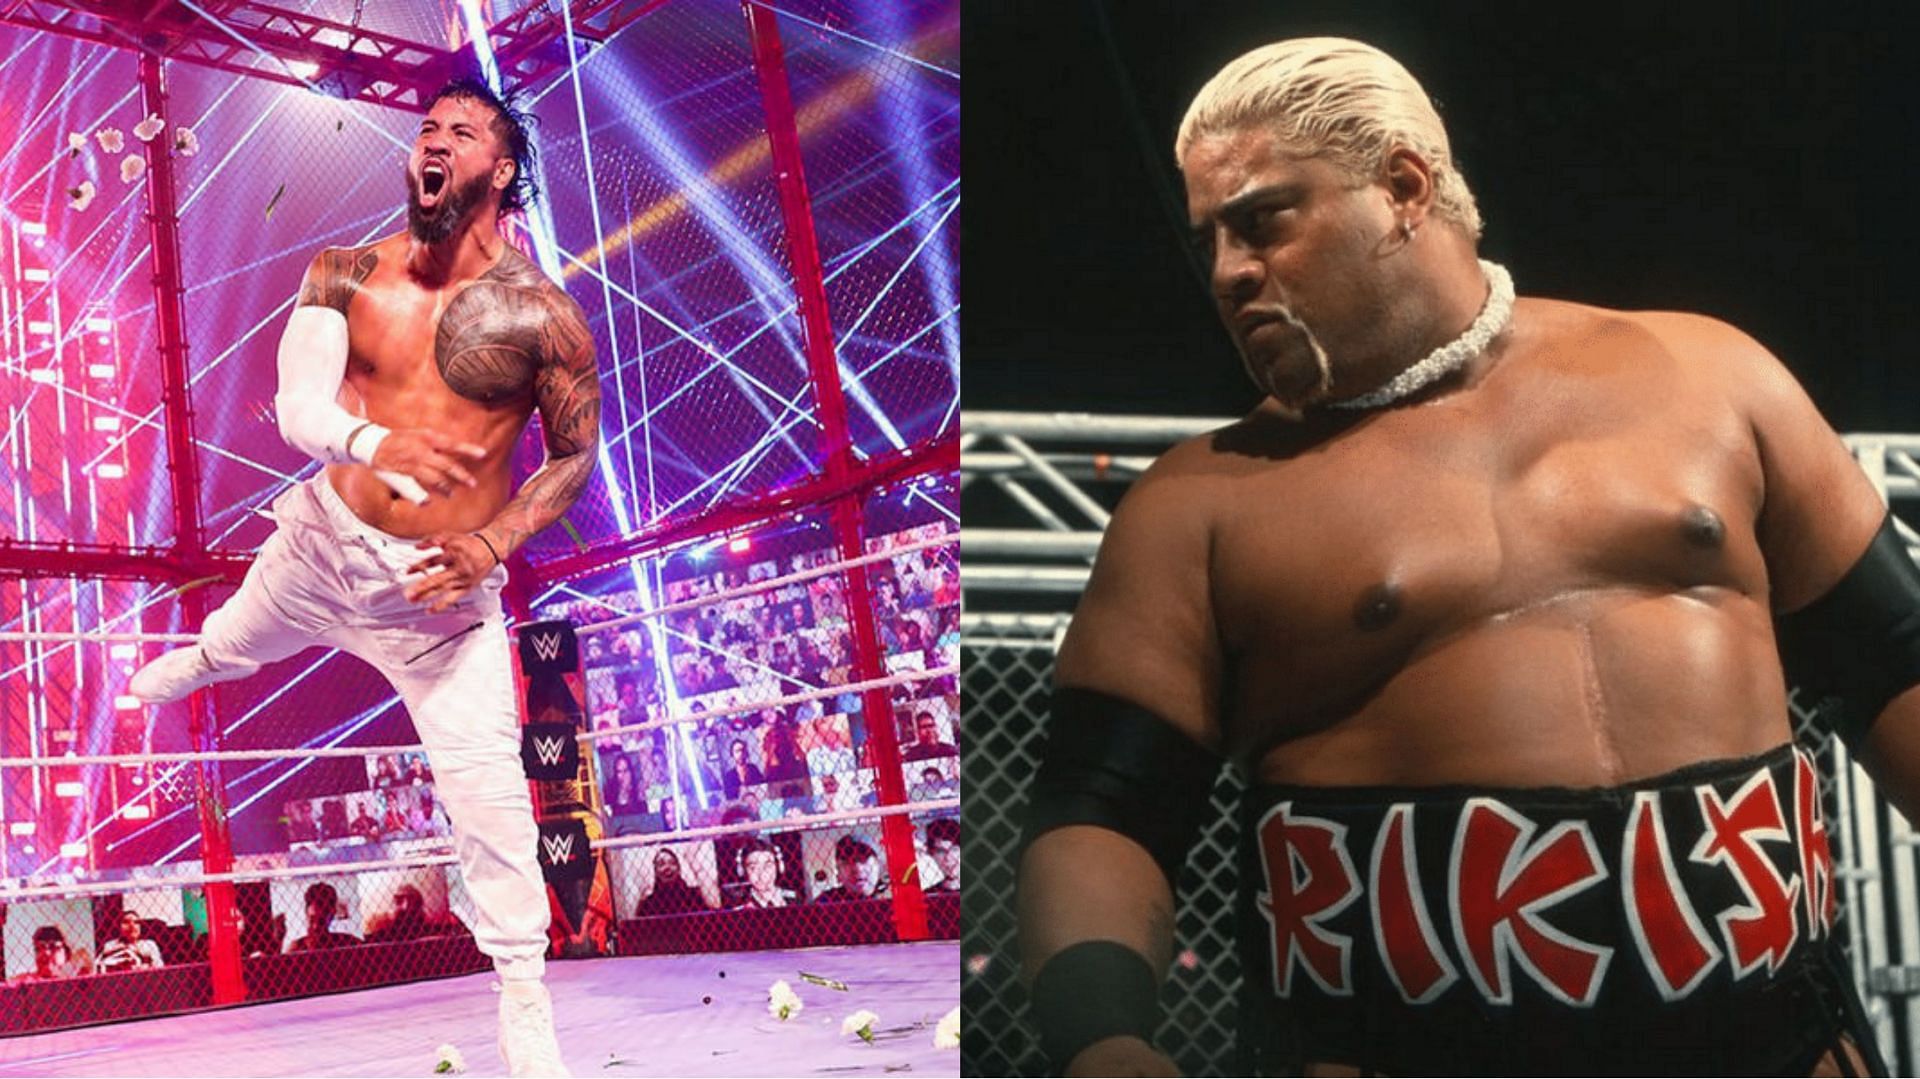 Jey Uso (left) and Rikishi (right)